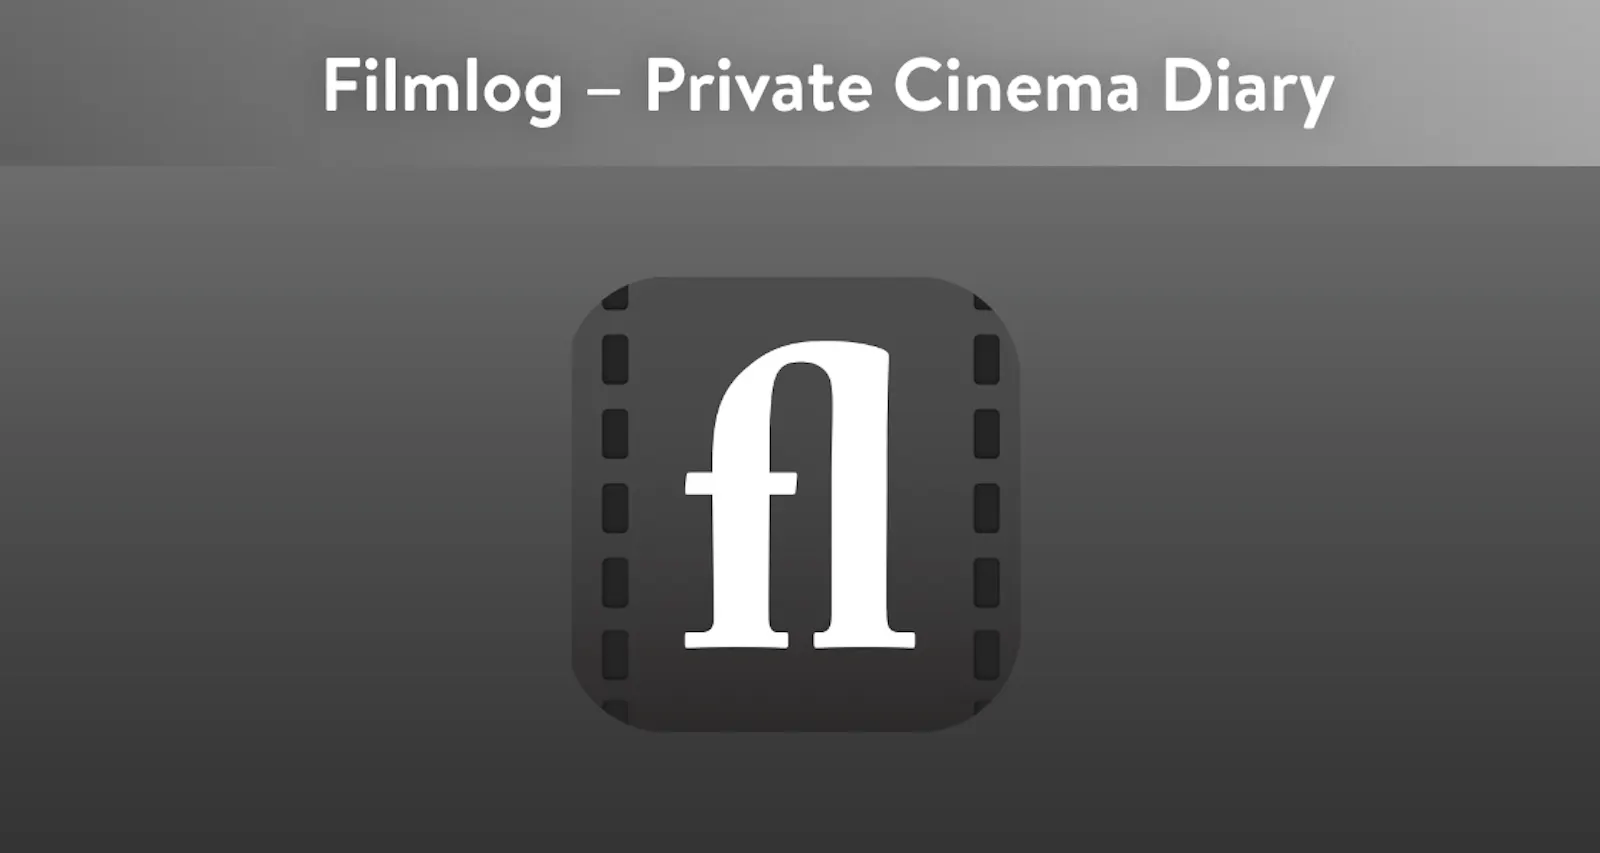 Filmlog – Private Cinema Diary: App icon showing a white "fl" on gray background.